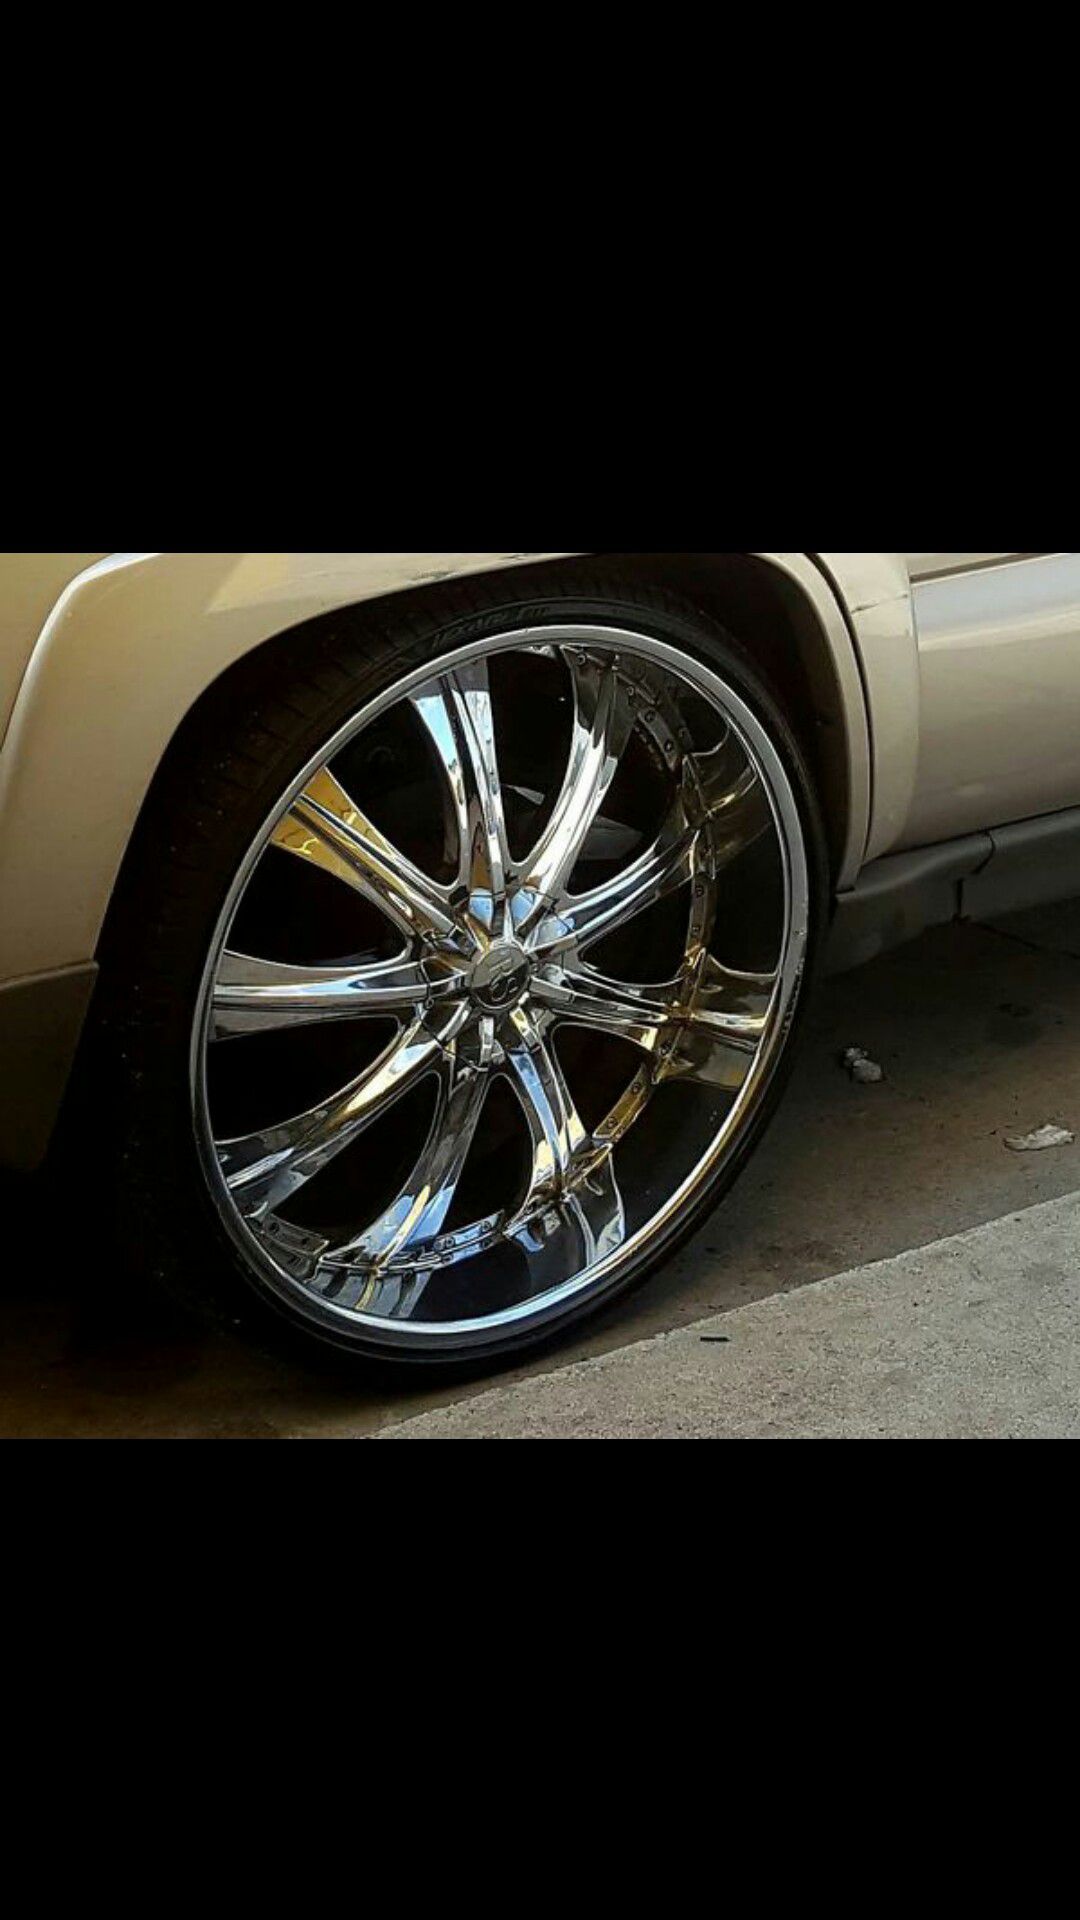 28" rims $500 no less one tire goes low after 4 days serious buyers only